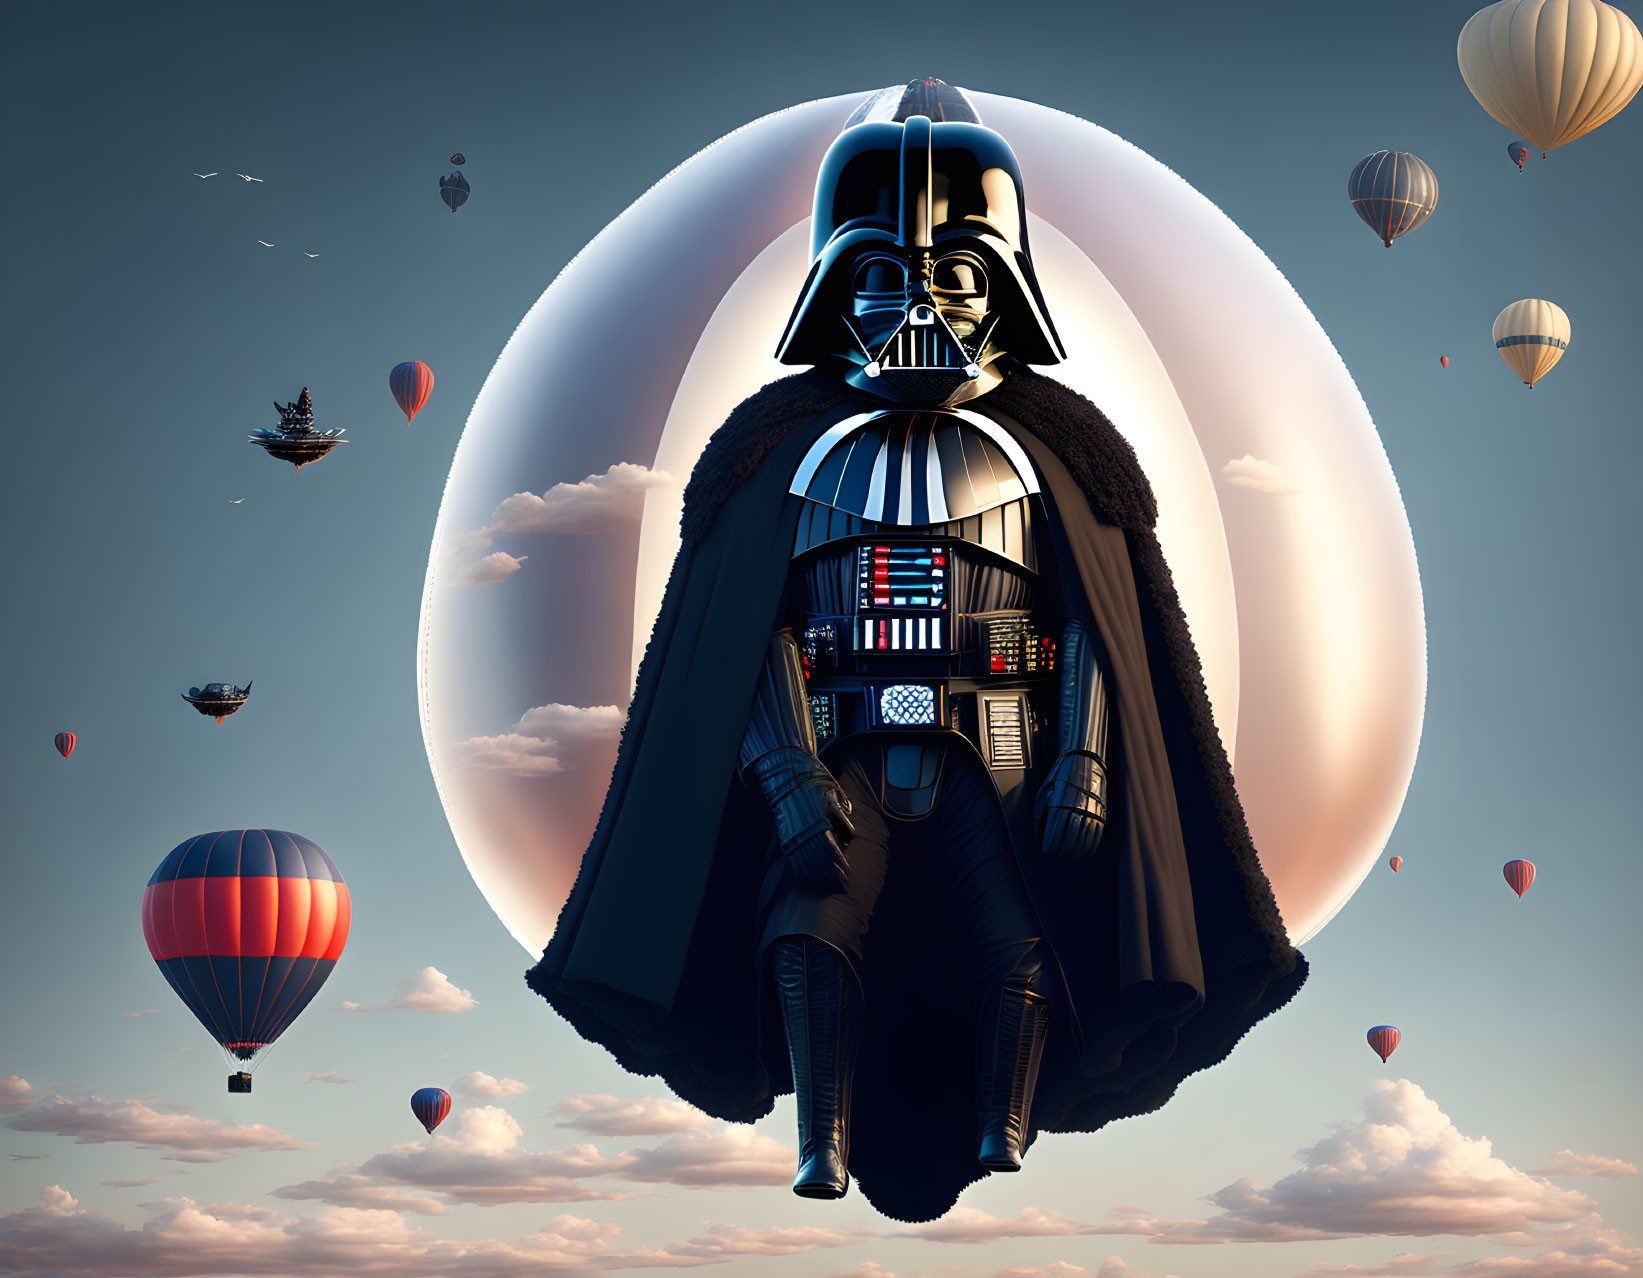 Character in black suit and helmet floats amidst colorful hot air balloons and flying ships